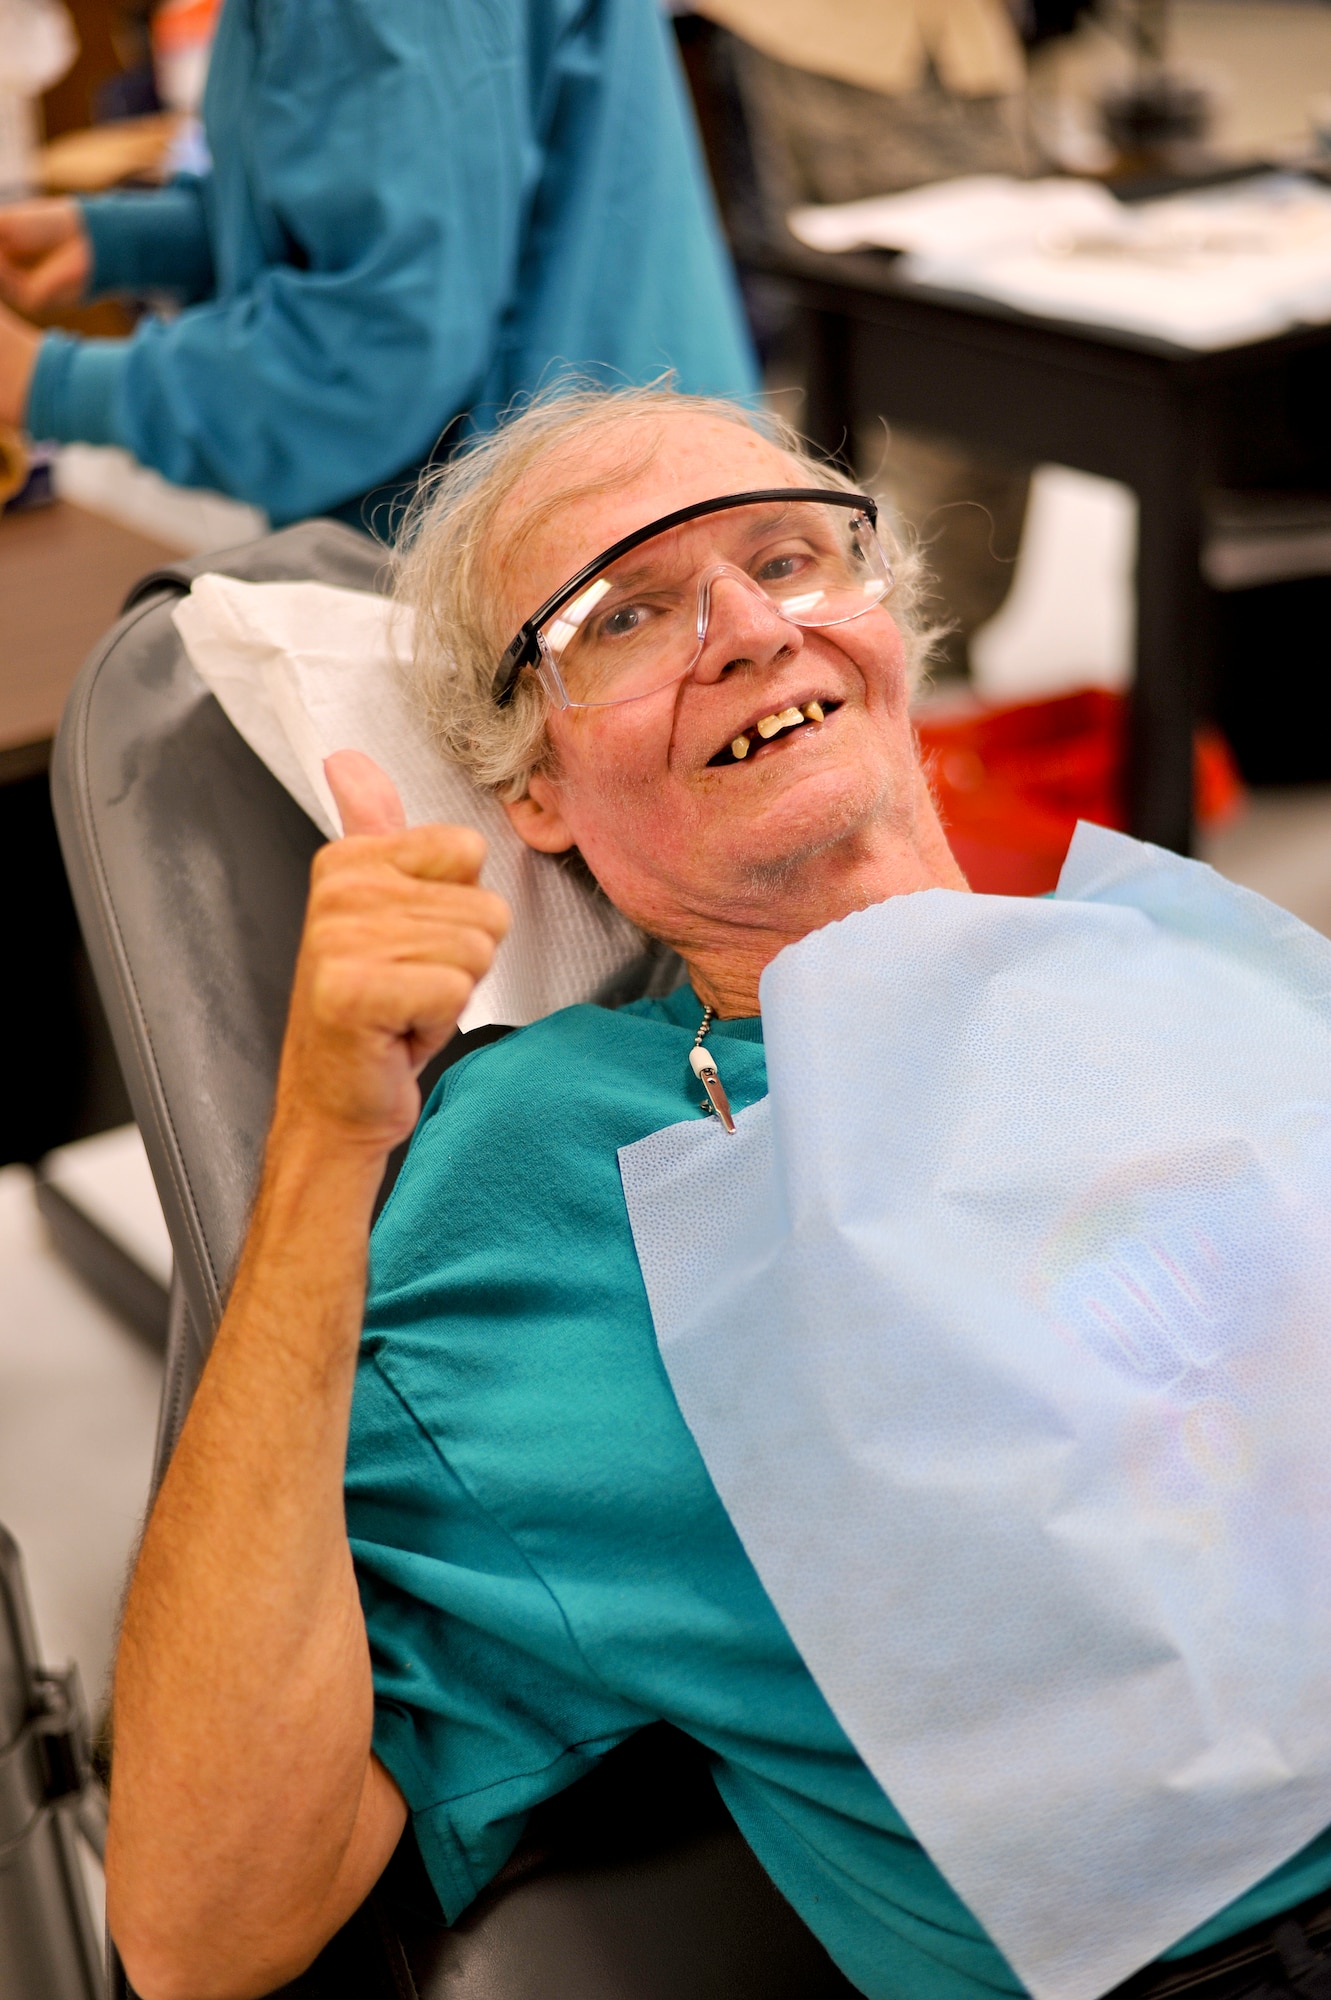 Edward Hicks, a resident of nearby Dresden, Tenn., shows his excitement before his second dental procedure in two weeks. Hicks visited Hope of Martin all but two days over the two-week event in order to see providers. On top of receiving a comprehensive optical exam and a new pair of glasses, also produced on-site, Hicks also had multiple dental procedures which included the extraction of 30 teeth badly in need of repair. Air National Guard photo by Master Sgt. Beth Holliker (Released).